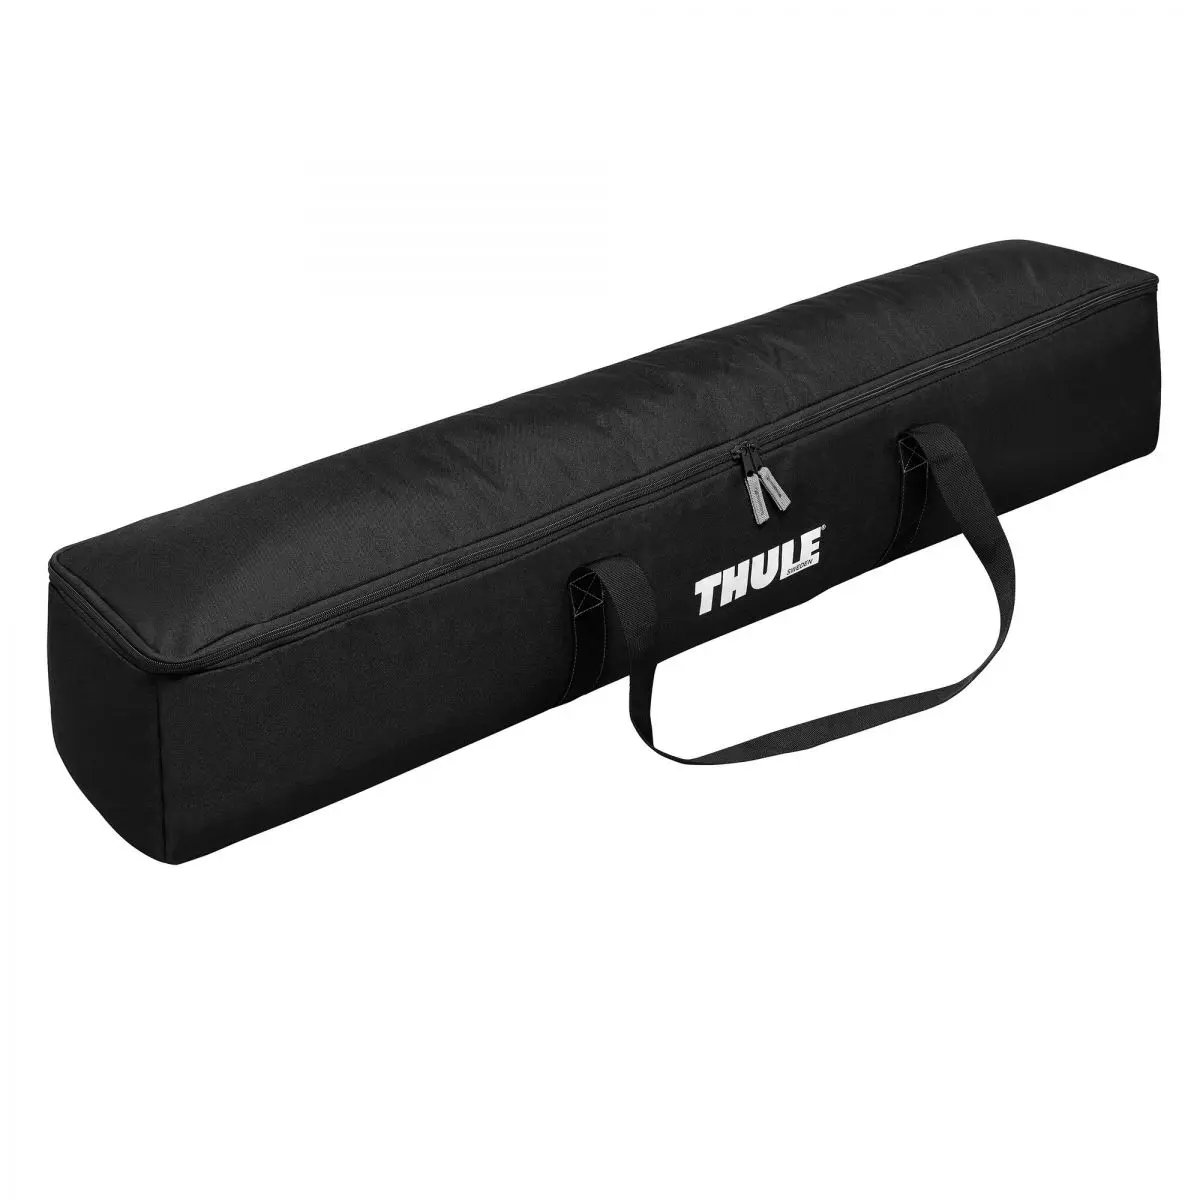 Thule Panorama pentru TO 6900, lungime 5,5 m, inaltime L